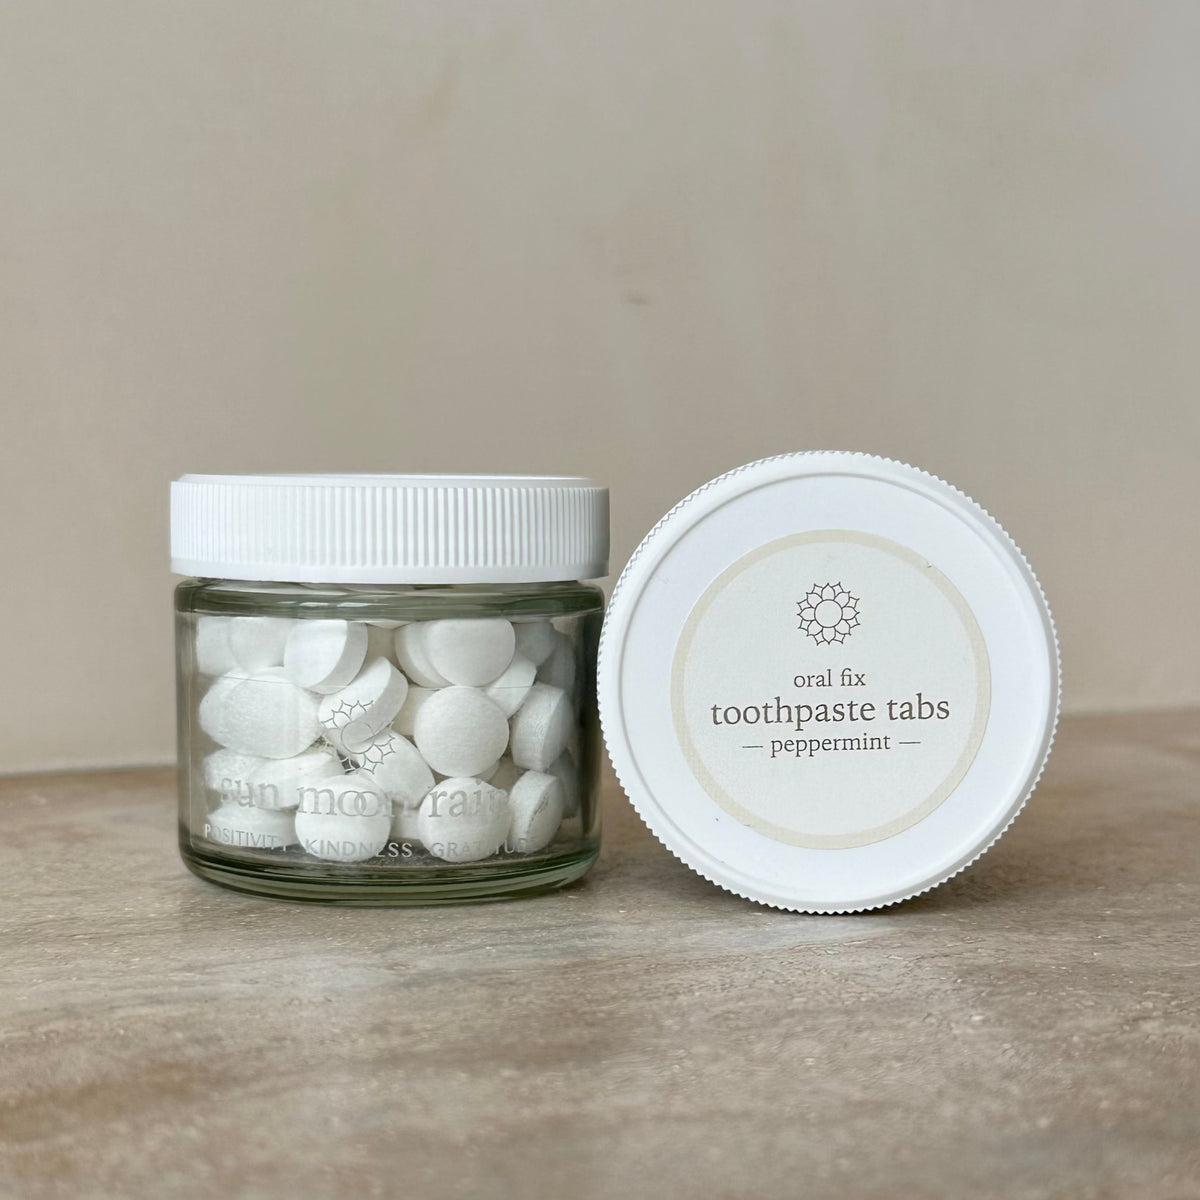 oral fix // peppermint toothpaste tabs